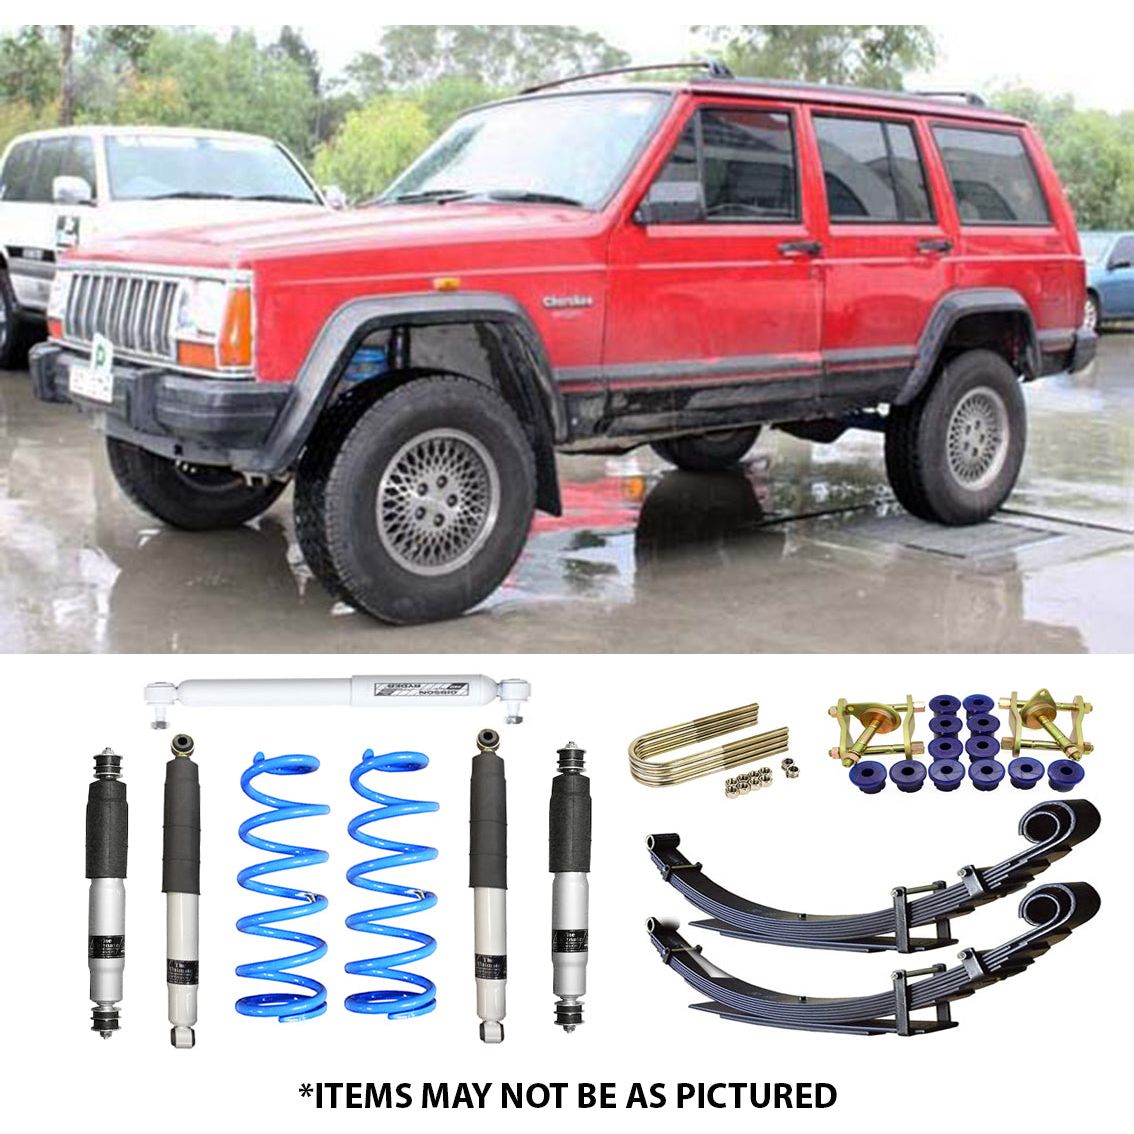 SELECT 4WD ULTIMATE SUSPENSION 2" LIFT KIT JEEP CHEROKEE XJ Select 4WD